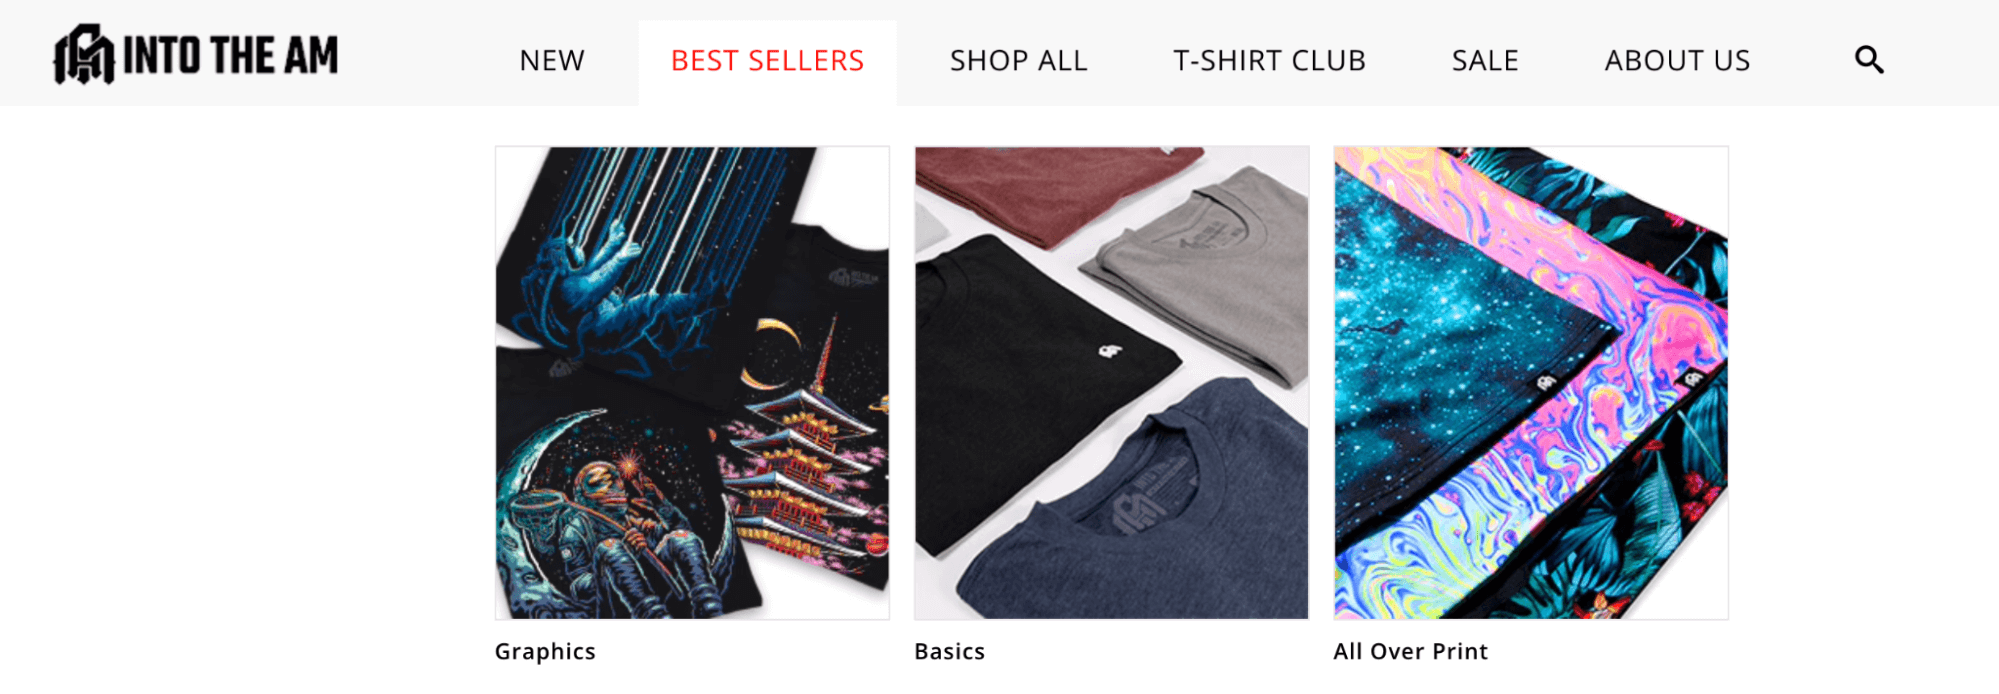 Navigation bar showcasing bestselling graphics, basics, and all over prints as subcategories beneath the main bestseller tab. 